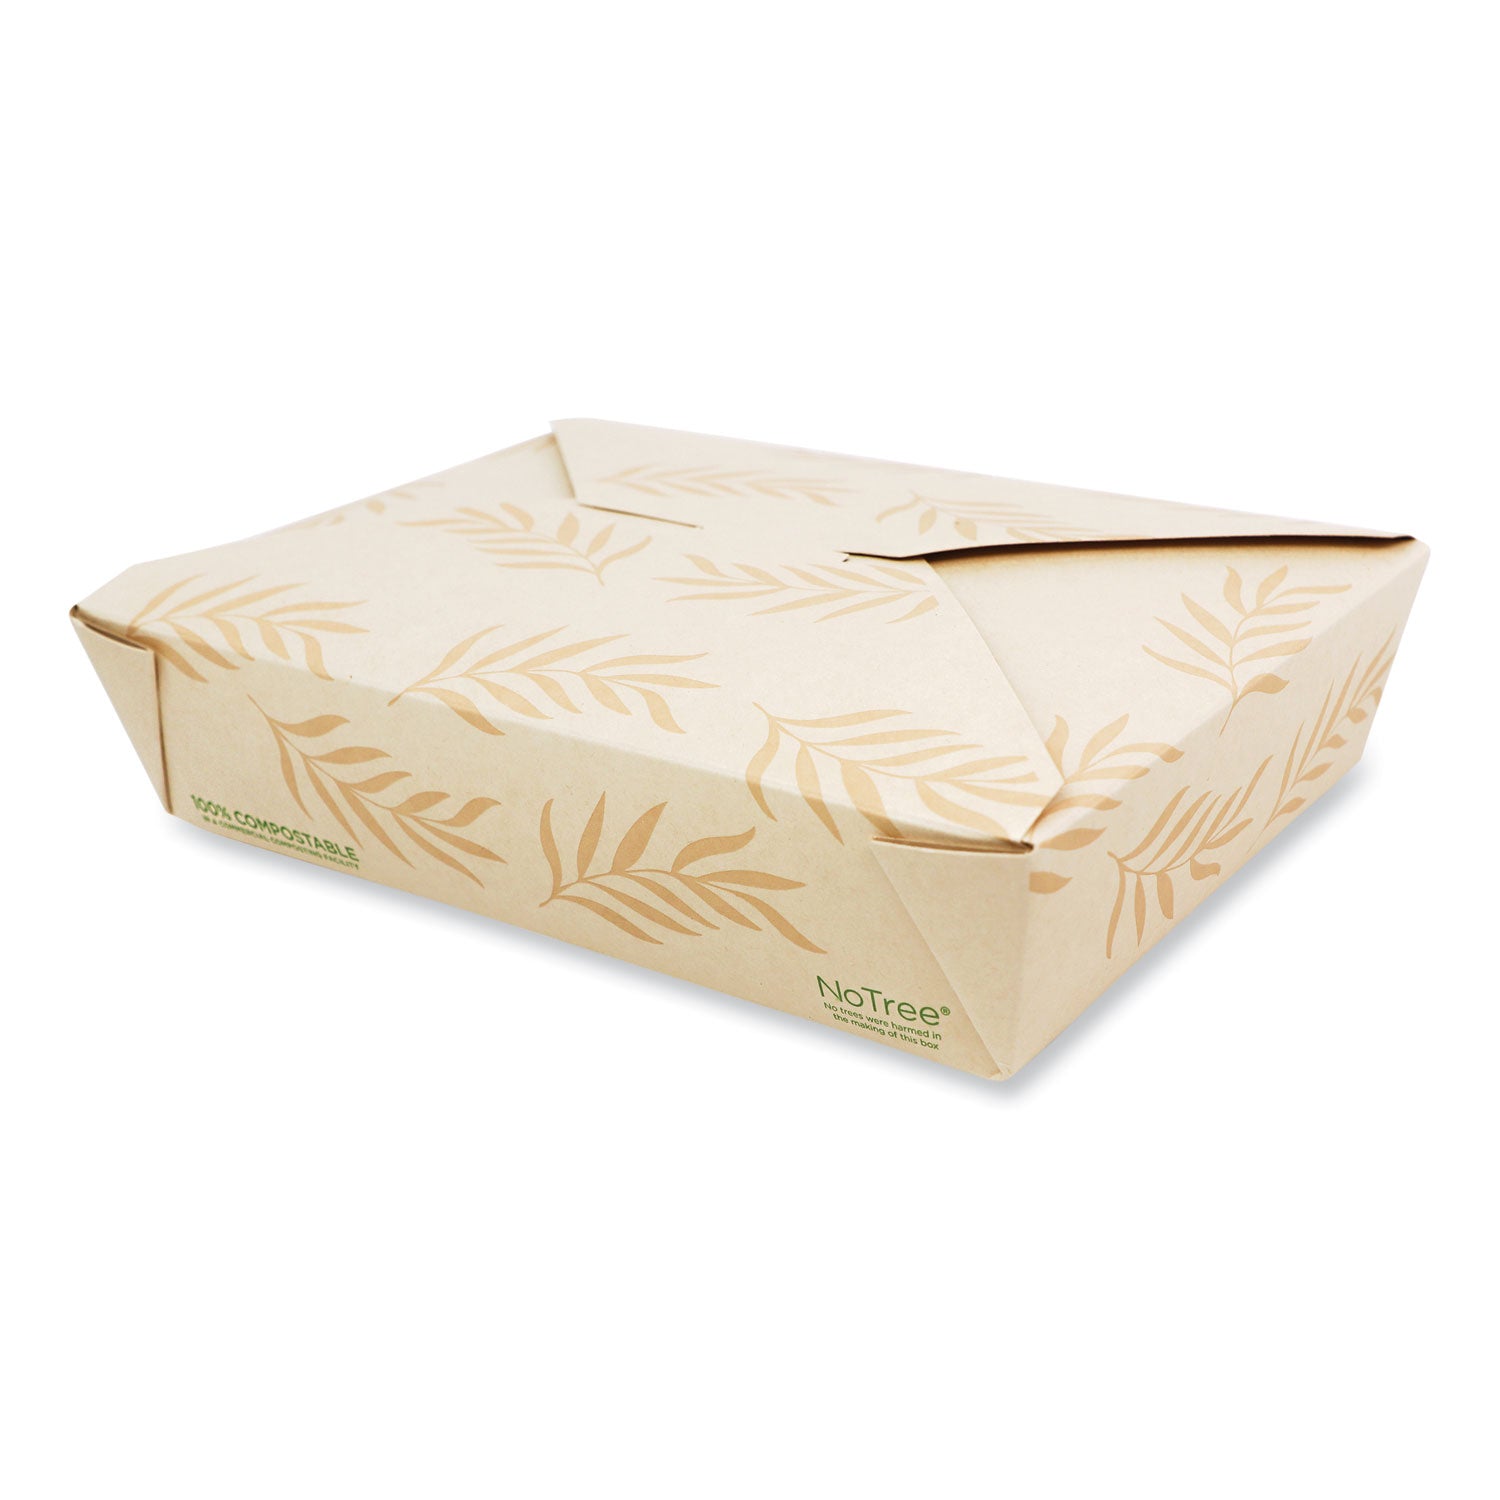 no-tree-folded-takeout-containers-50-oz-62-x-85-x-185-natural-sugarcane-200-carton_wortont2 - 1